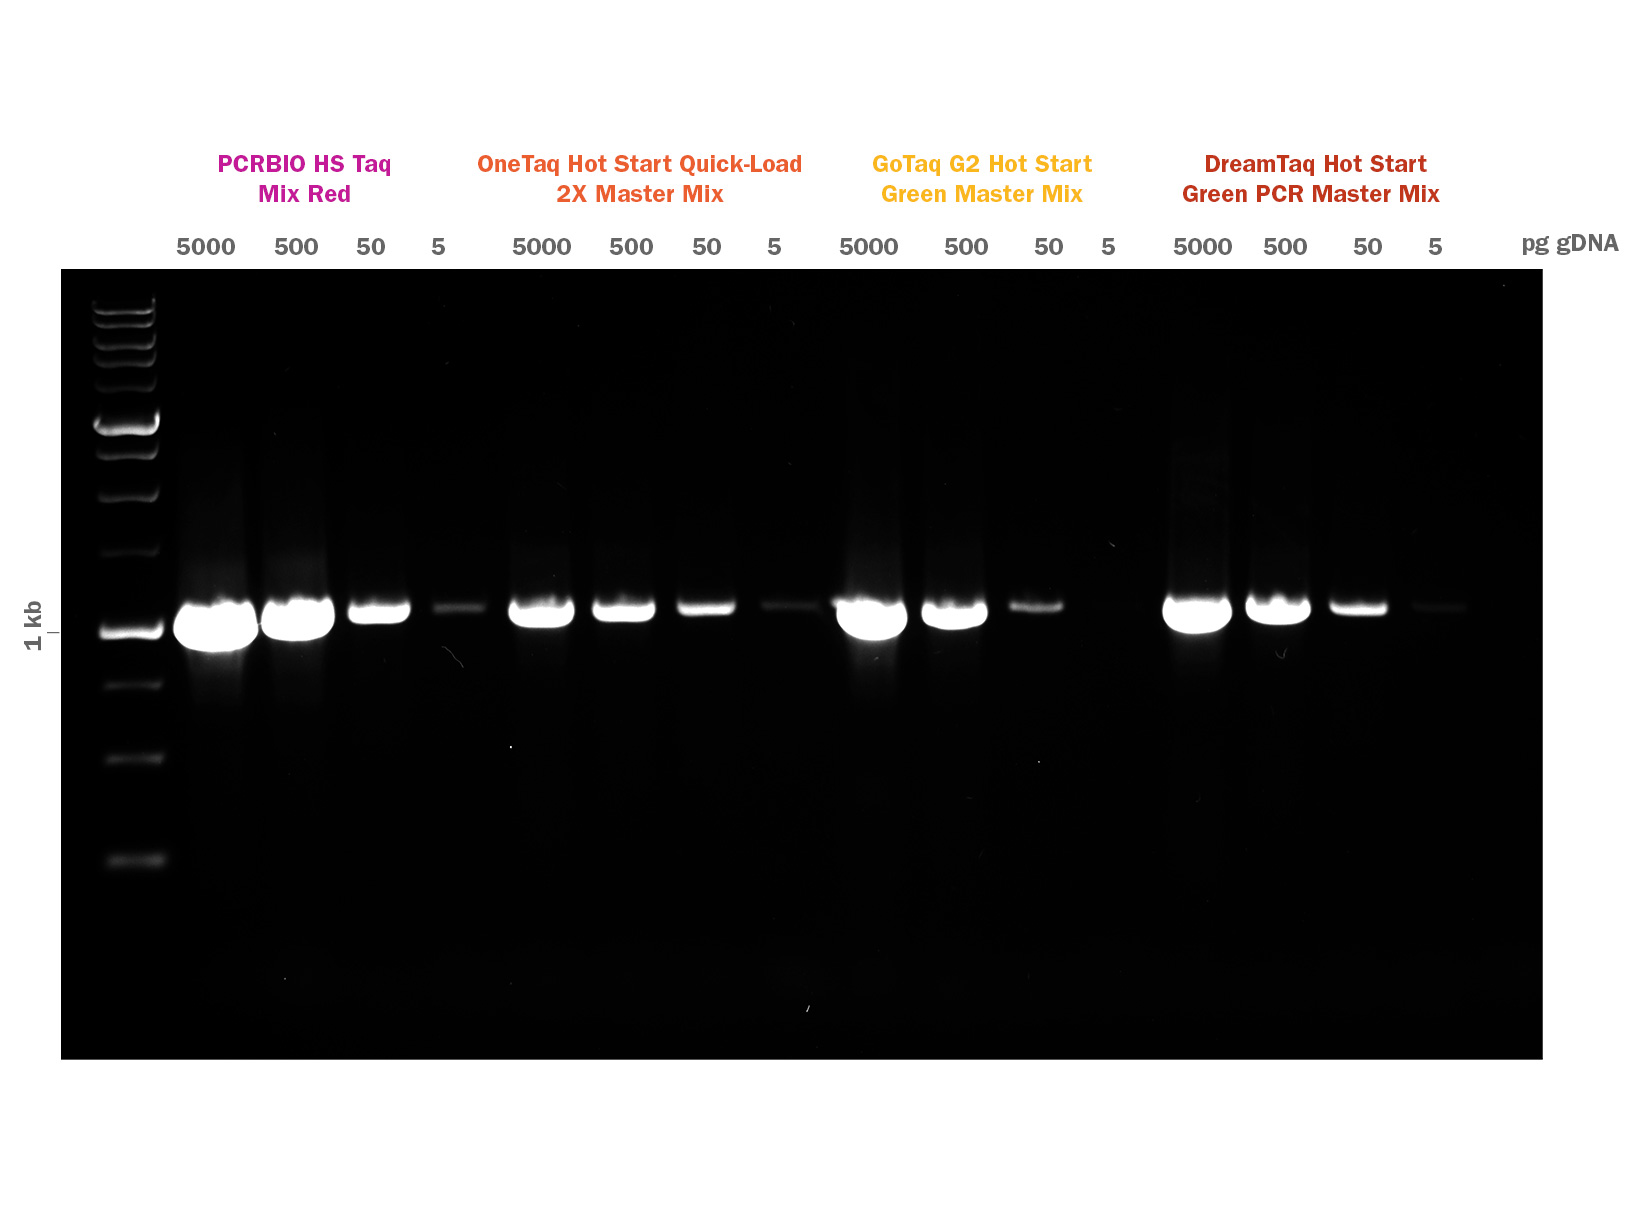 Gel image showing PCRBIO HS Taq Mix Red competitor comparison